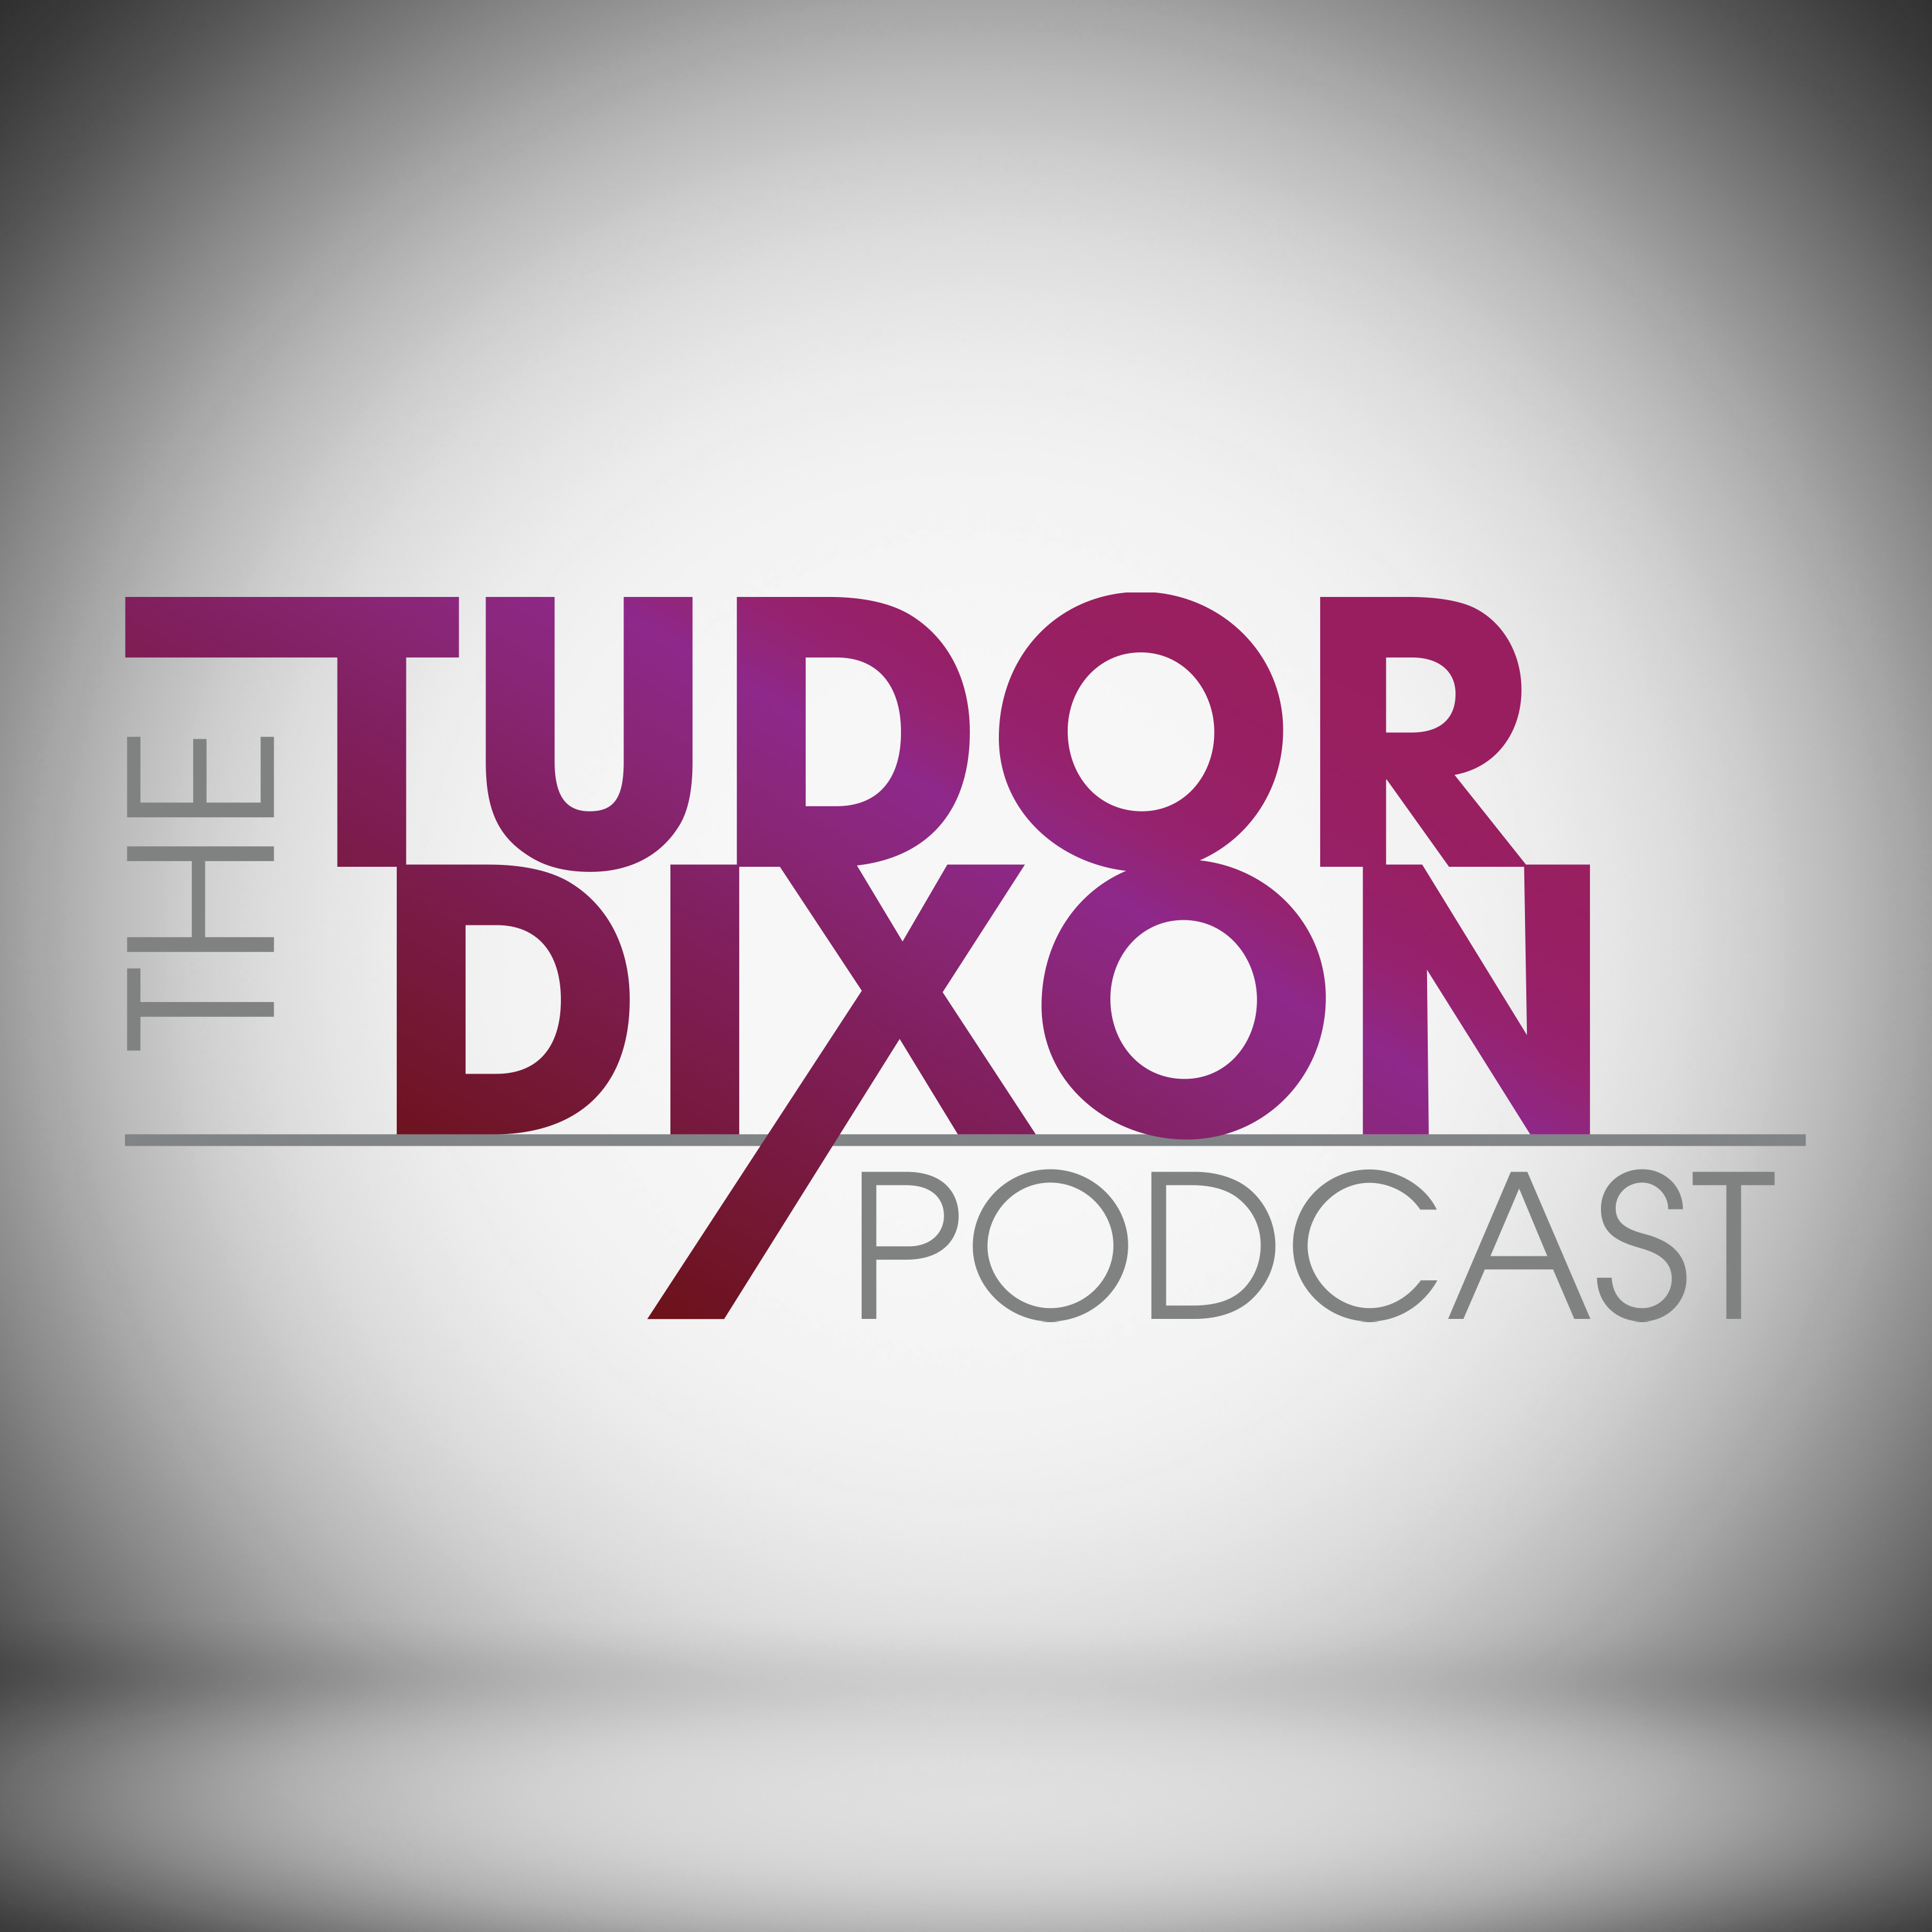 The Tudor Dixon Podcast: The Greatest Threat to Michigan Hunting with Victor Skinner